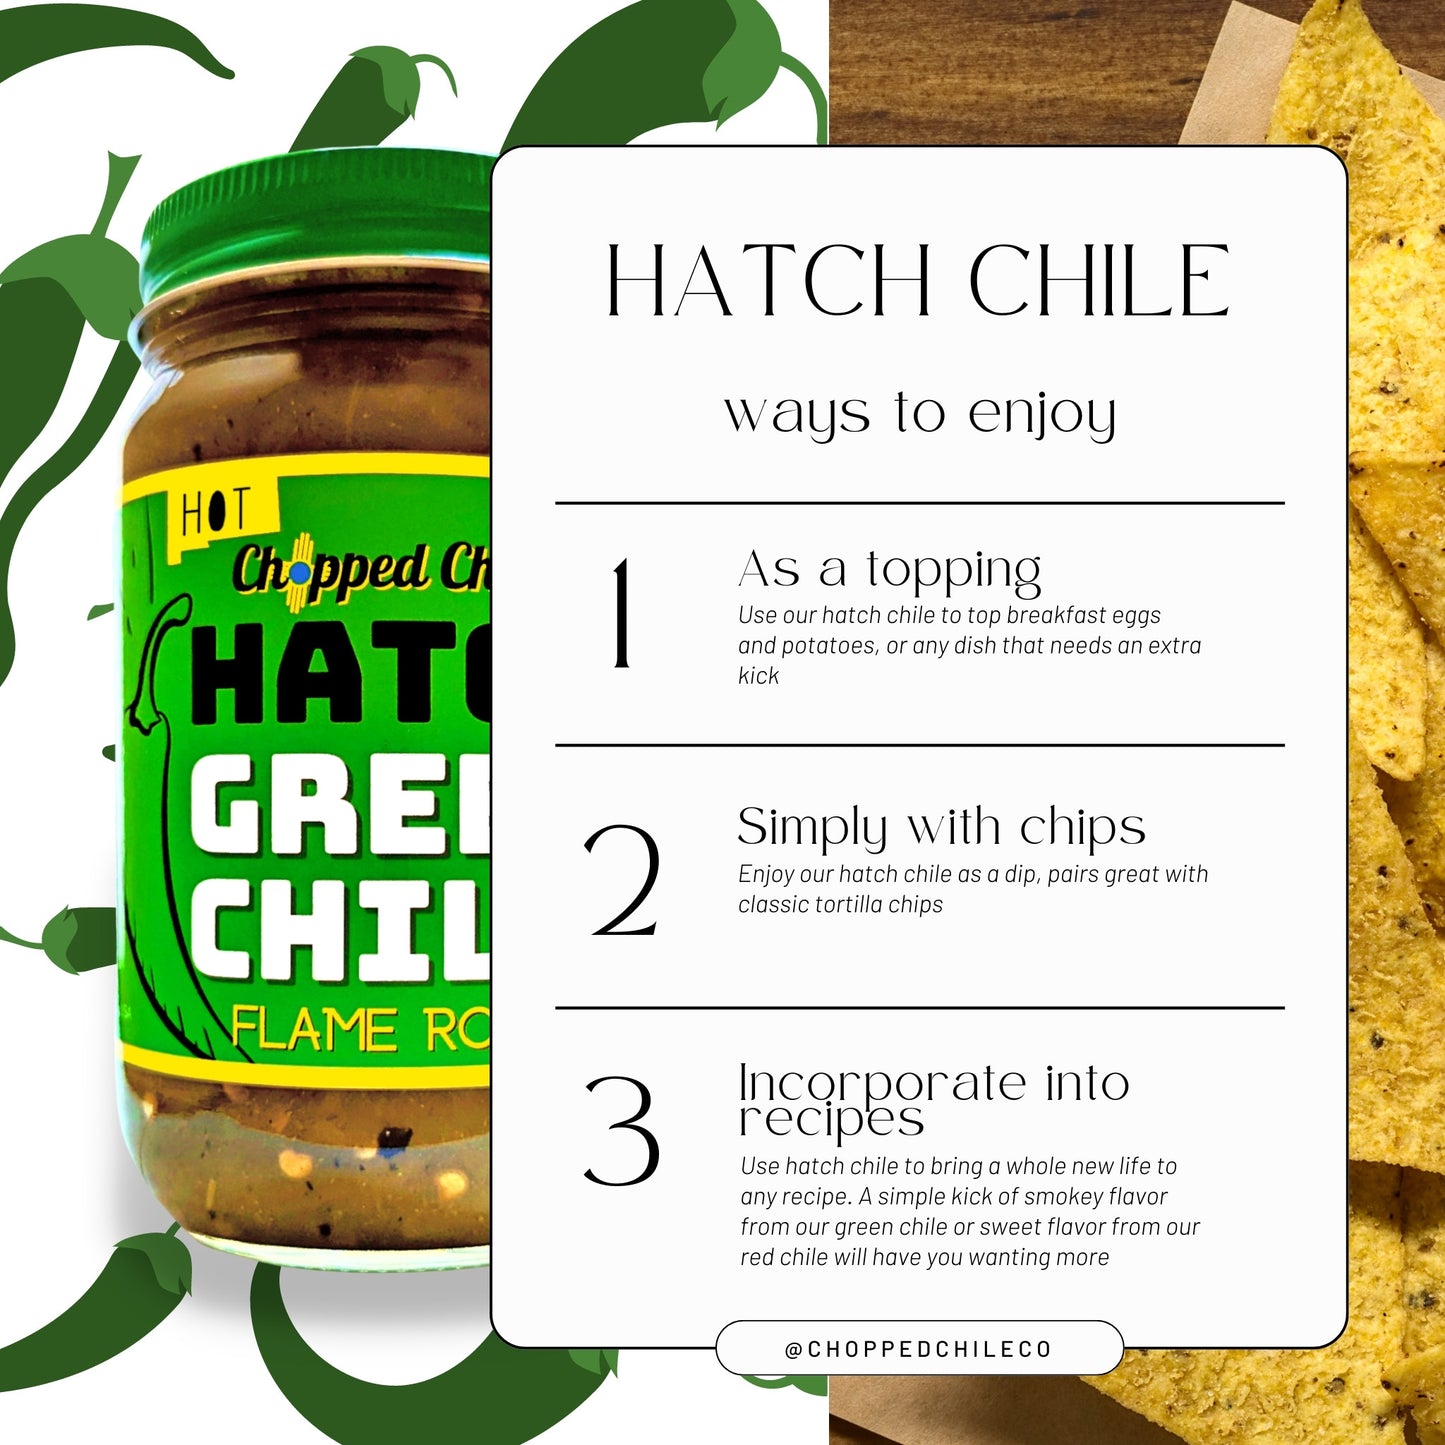 Flame Roasted Hatch Green Chile